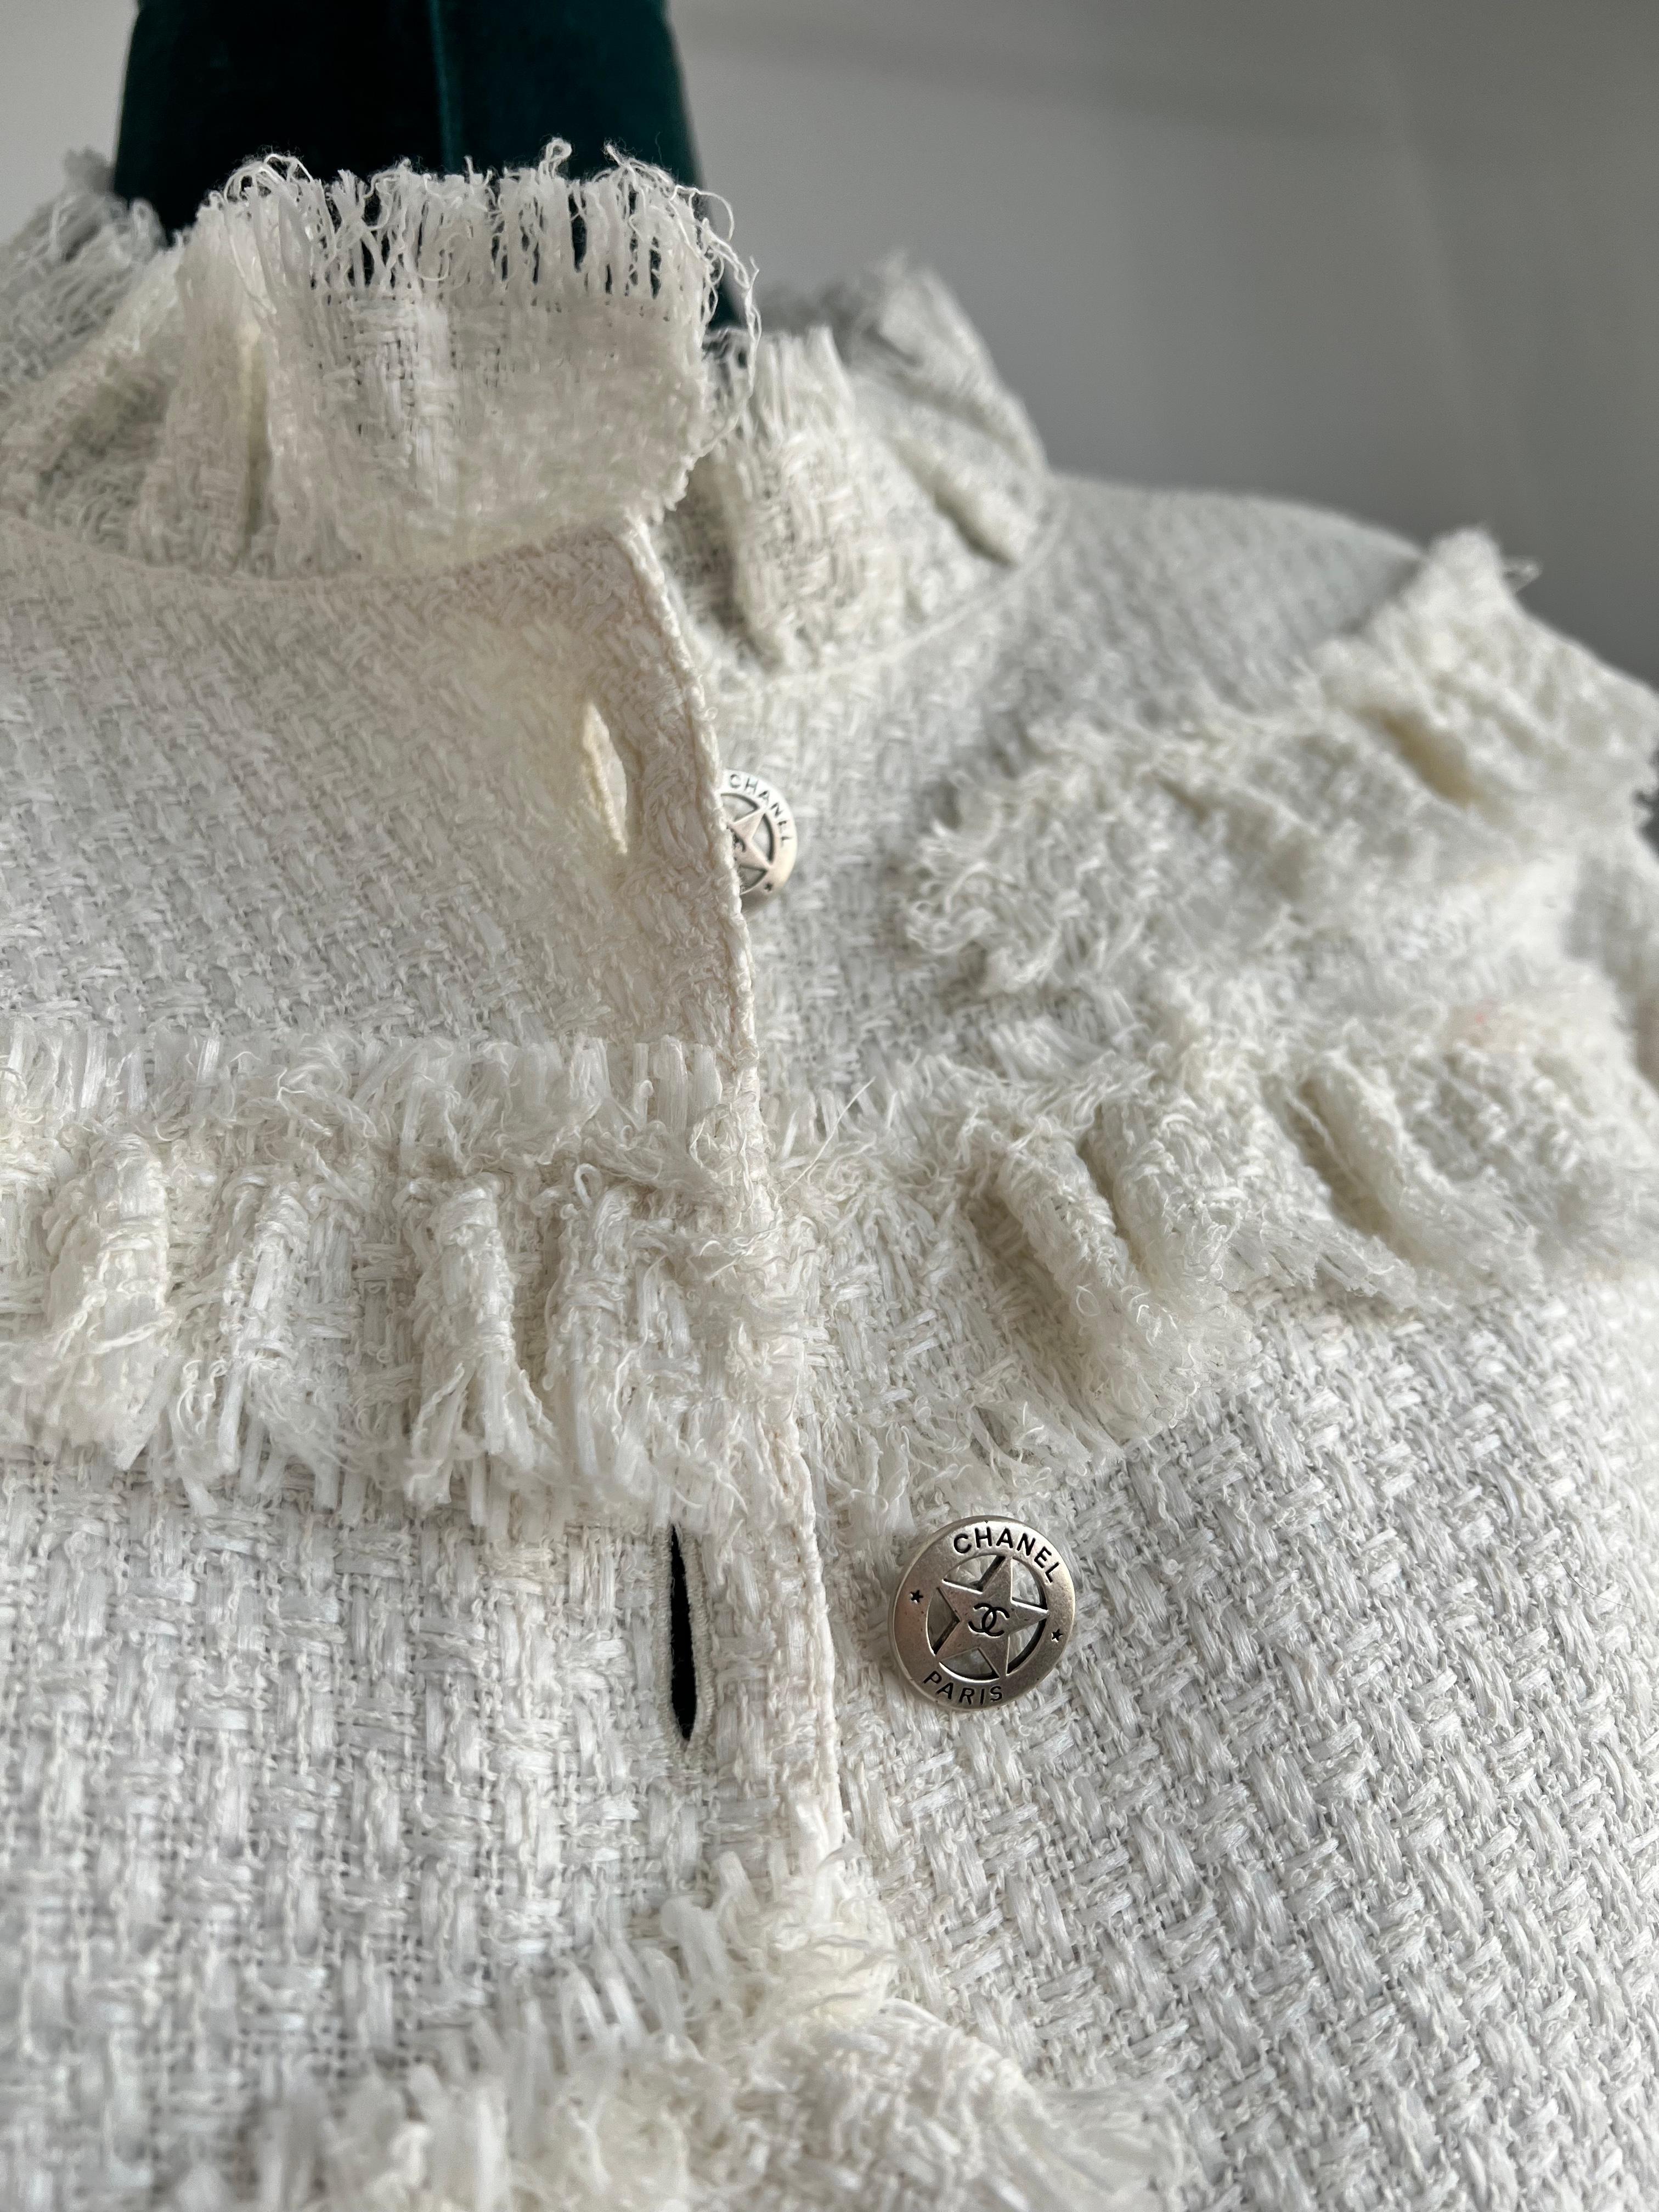 Chanel Dallas, Métiers d'Art récollection 2014-1025 , white  light tweed jacket with fringe and Star button with
soft silk  Camellia print lining. 